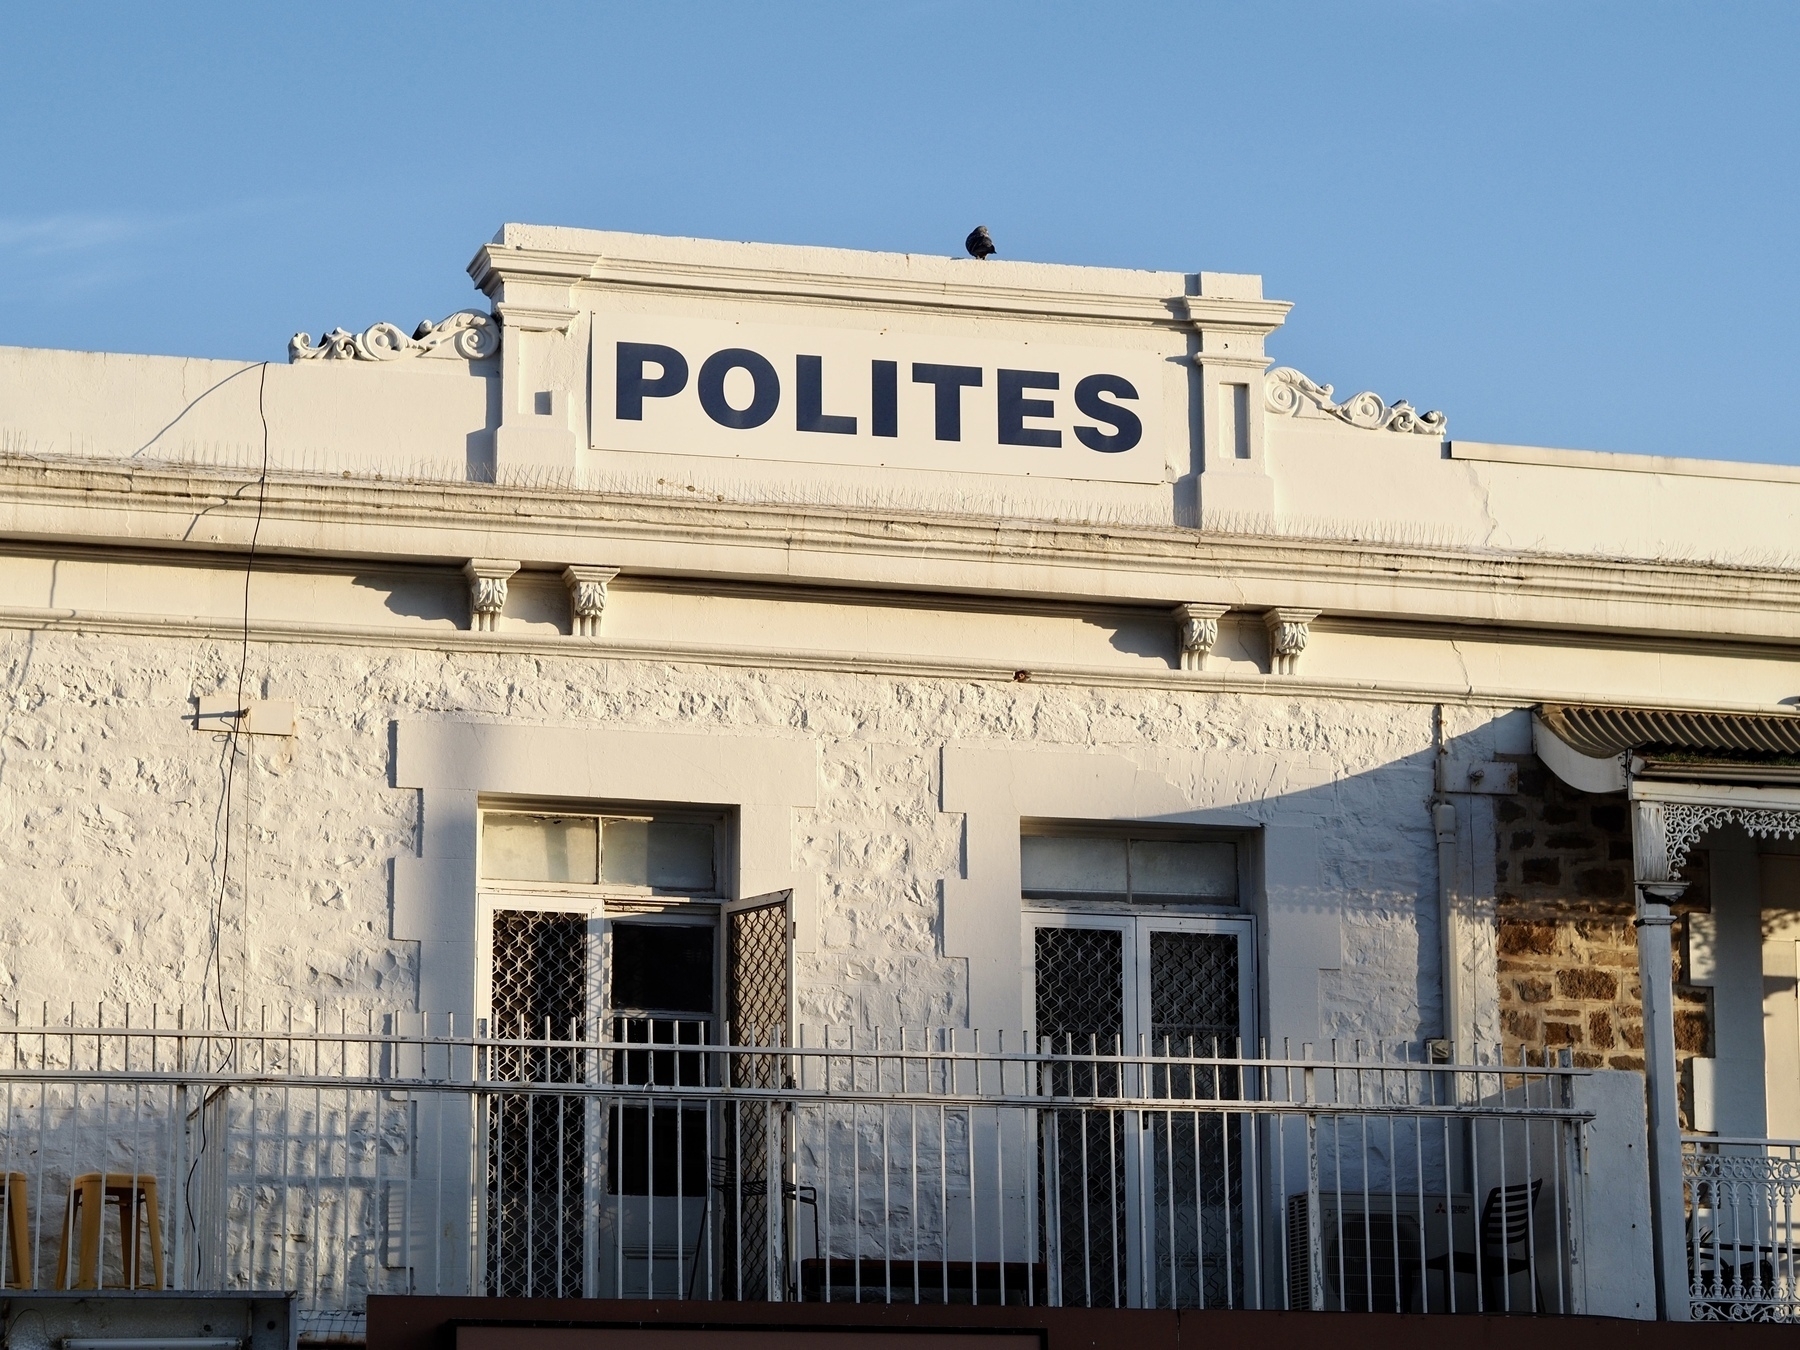 A building that shows the name POLITES, with a pigeon on top